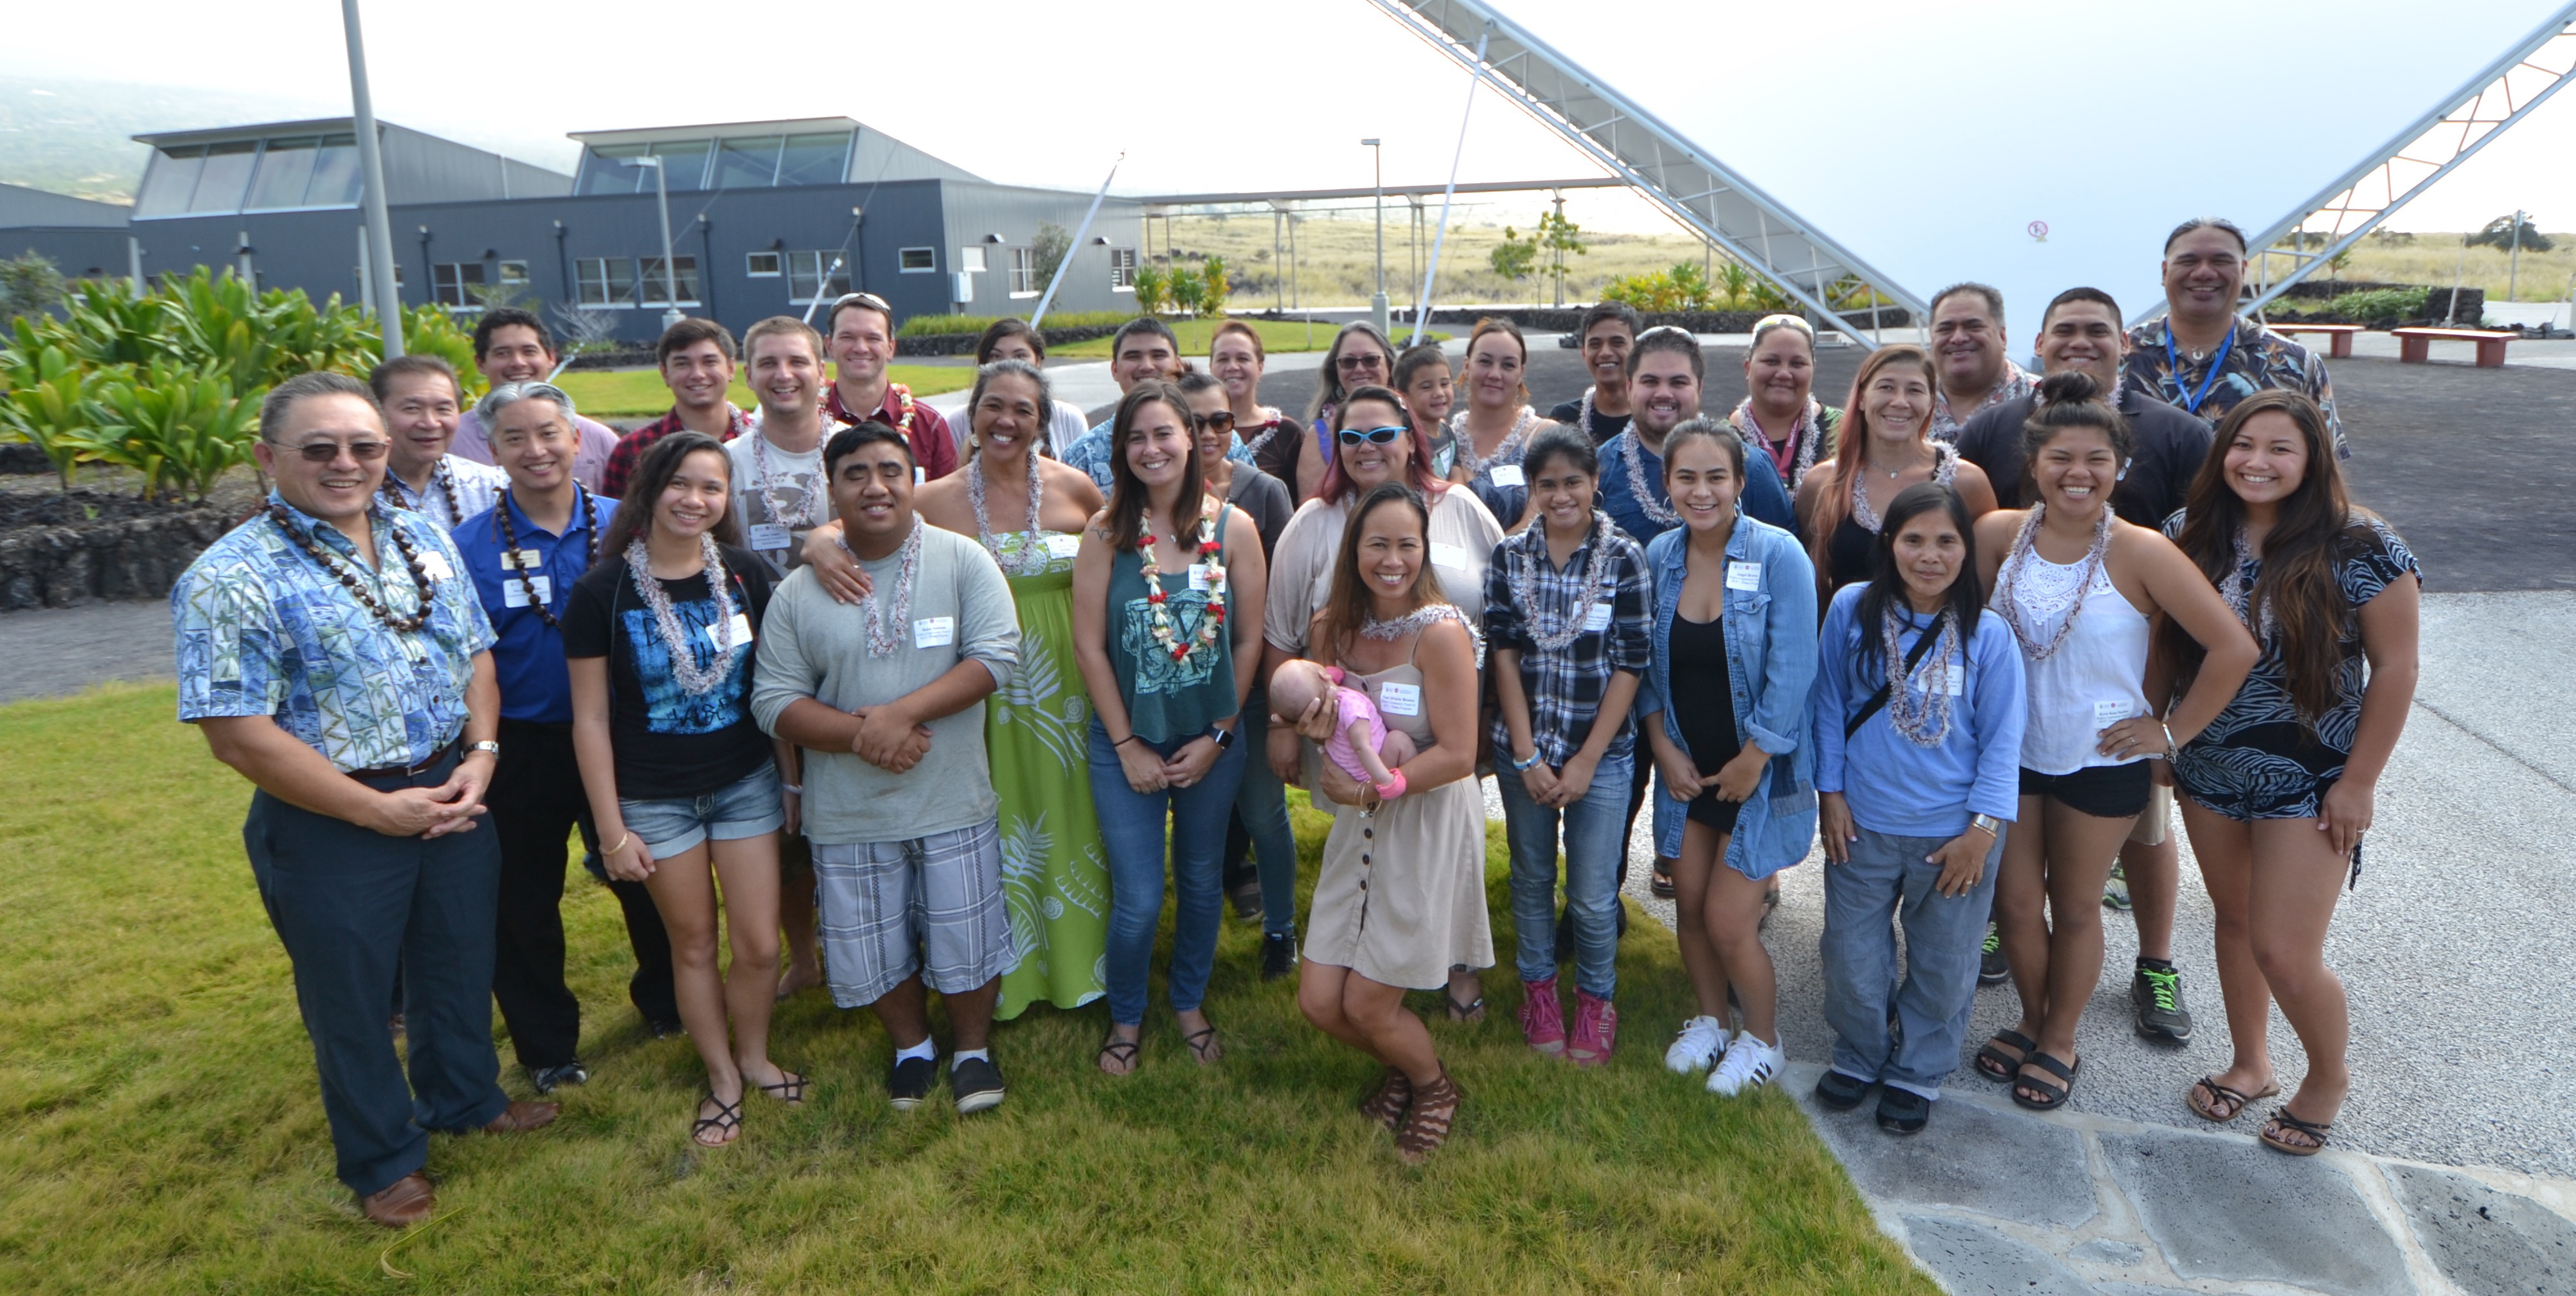 Scholarship recipients and donors, including participants in Ēlama Project, pose for a group photo at the Hawai’i Community College - Pālamanui campus in Kona.